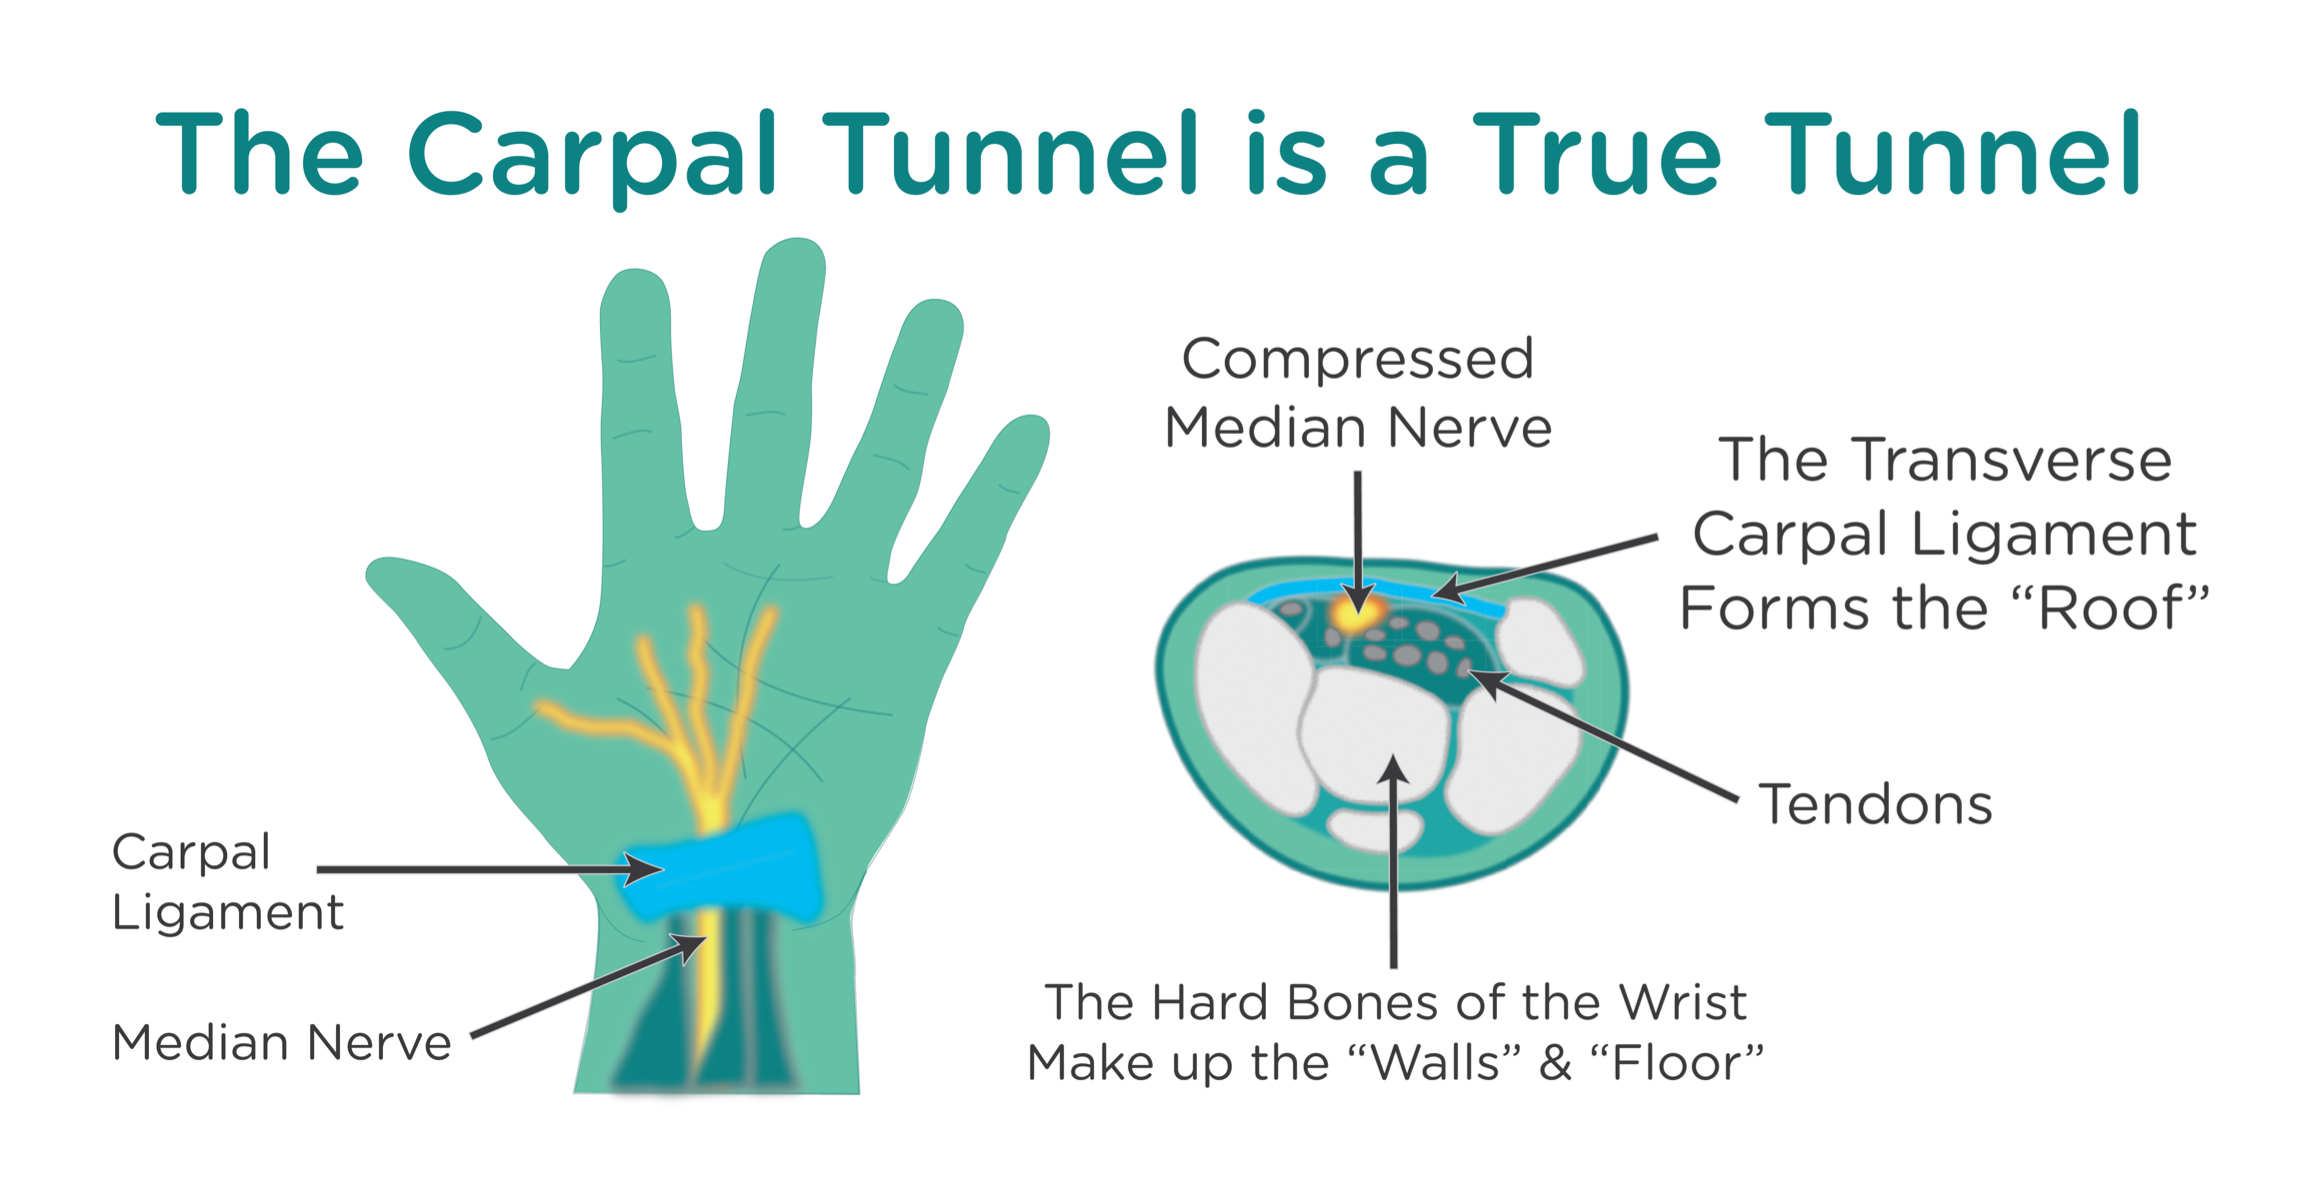 Anatomy of the Carpal Tunnel.